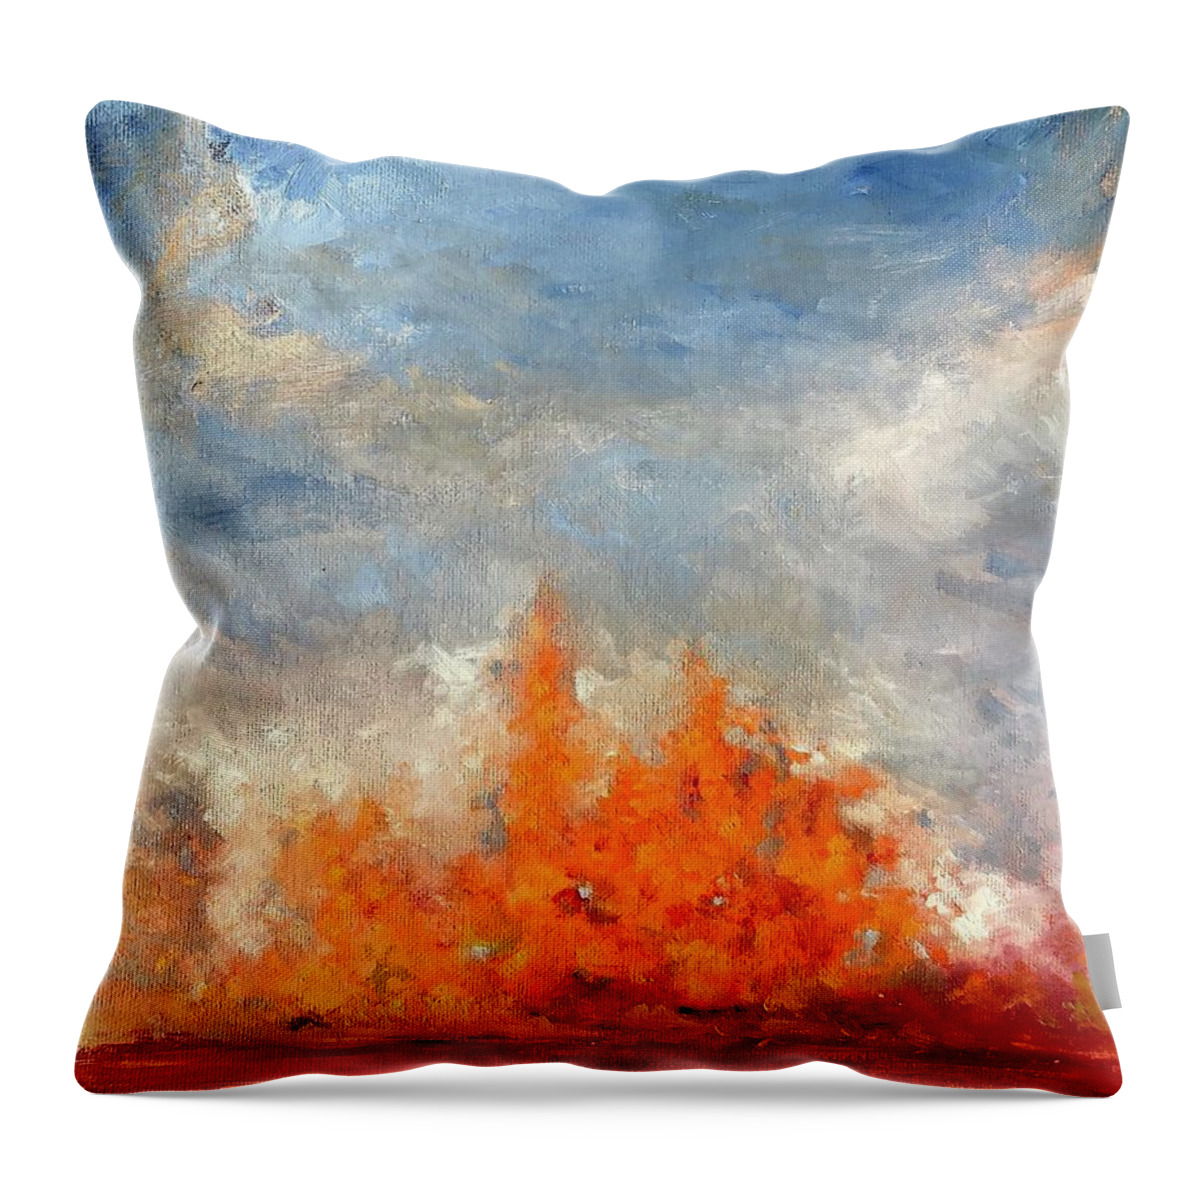 Waterside Throw Pillow featuring the painting Riparian Orange by Roger Clarke